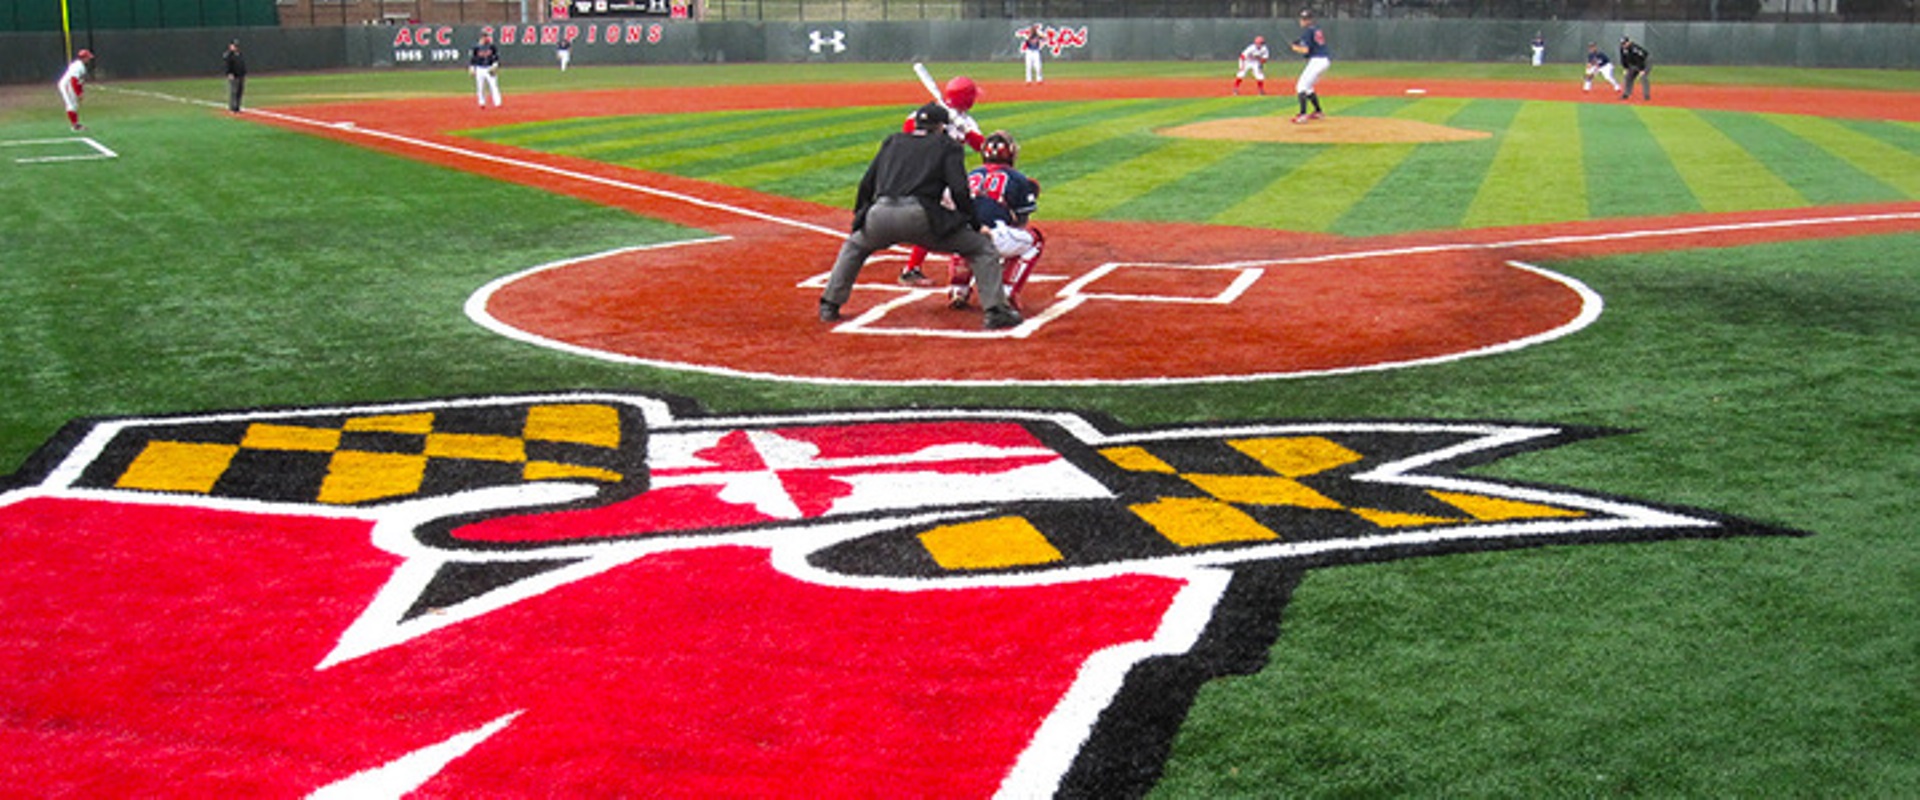 University of Maryland Unveils Plans for New FieldTurf Baseball Field